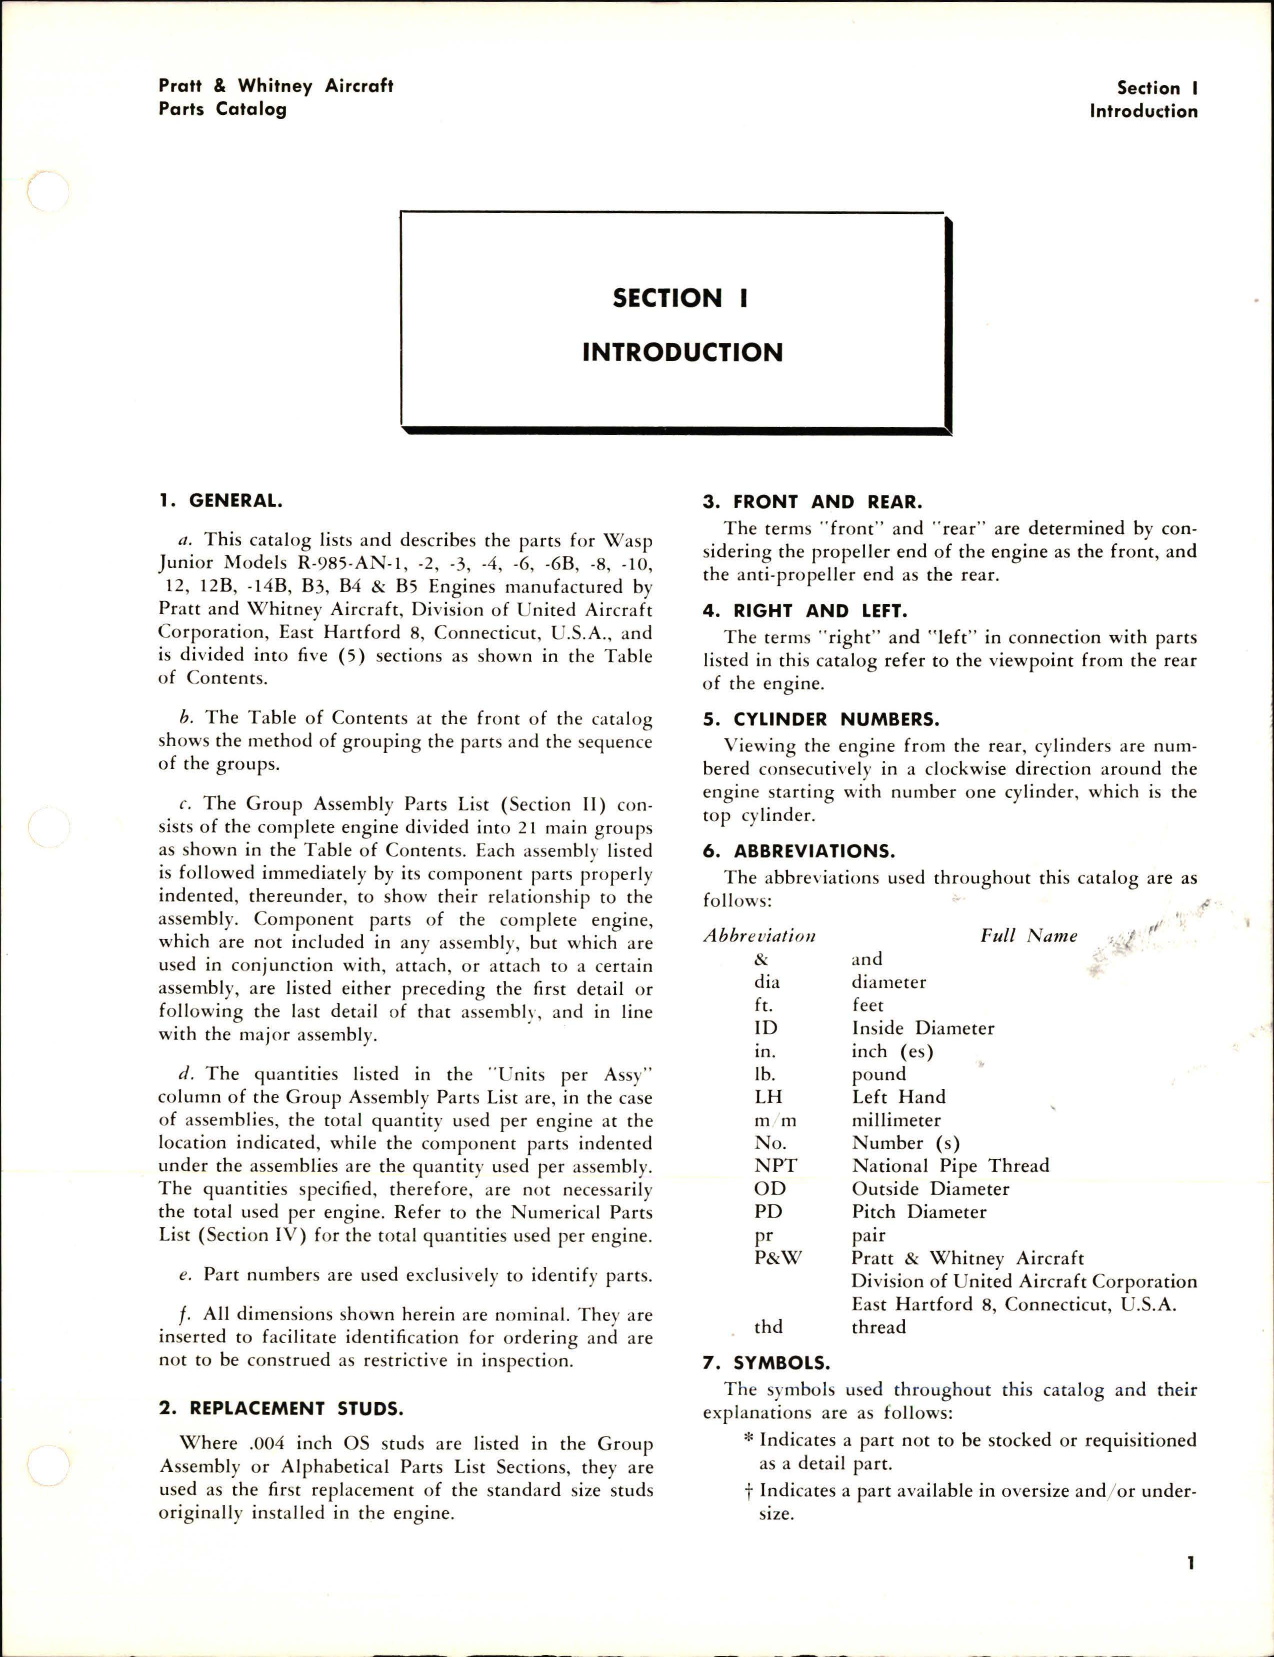 Sample page 7 from AirCorps Library document: Parts Catalog for Wasp Junior - AN-1, AN-2, AN-3, AN-4, AN-6, AN-6B, AN-8, AN-10, AN-12, AN-12B, AN-14B, B3, B4, B5